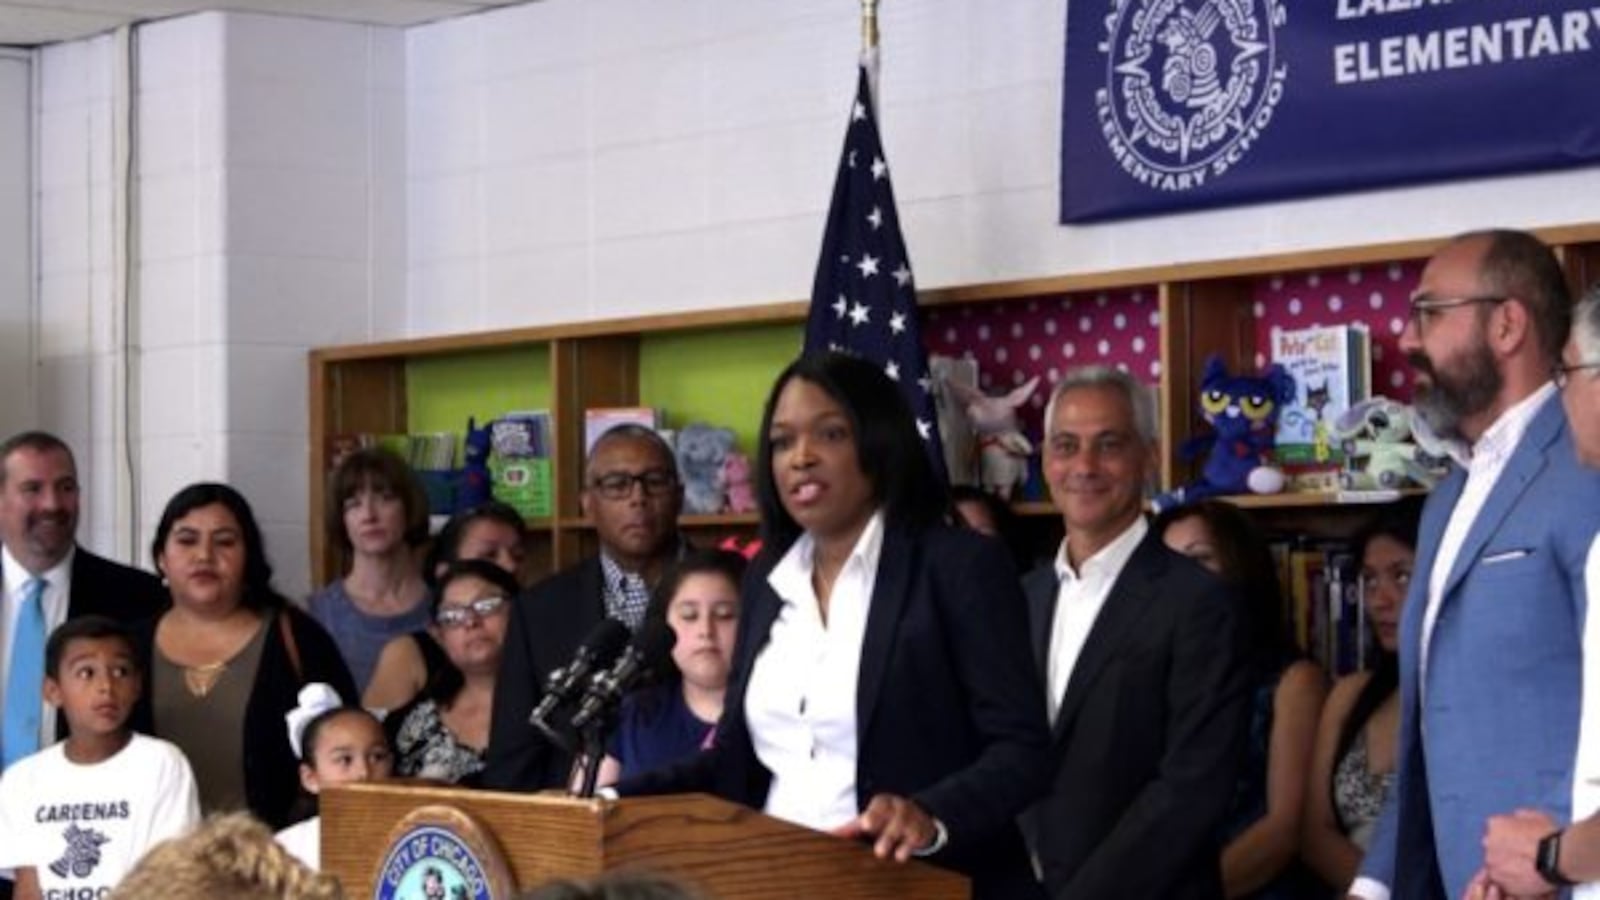 Chicago Public Schools CEO Janice Jackson and Mayor Rahm Emanuel announced the district's $1 billion capital plan at Lázaro Cardenas Elementary School in Little Village in July.